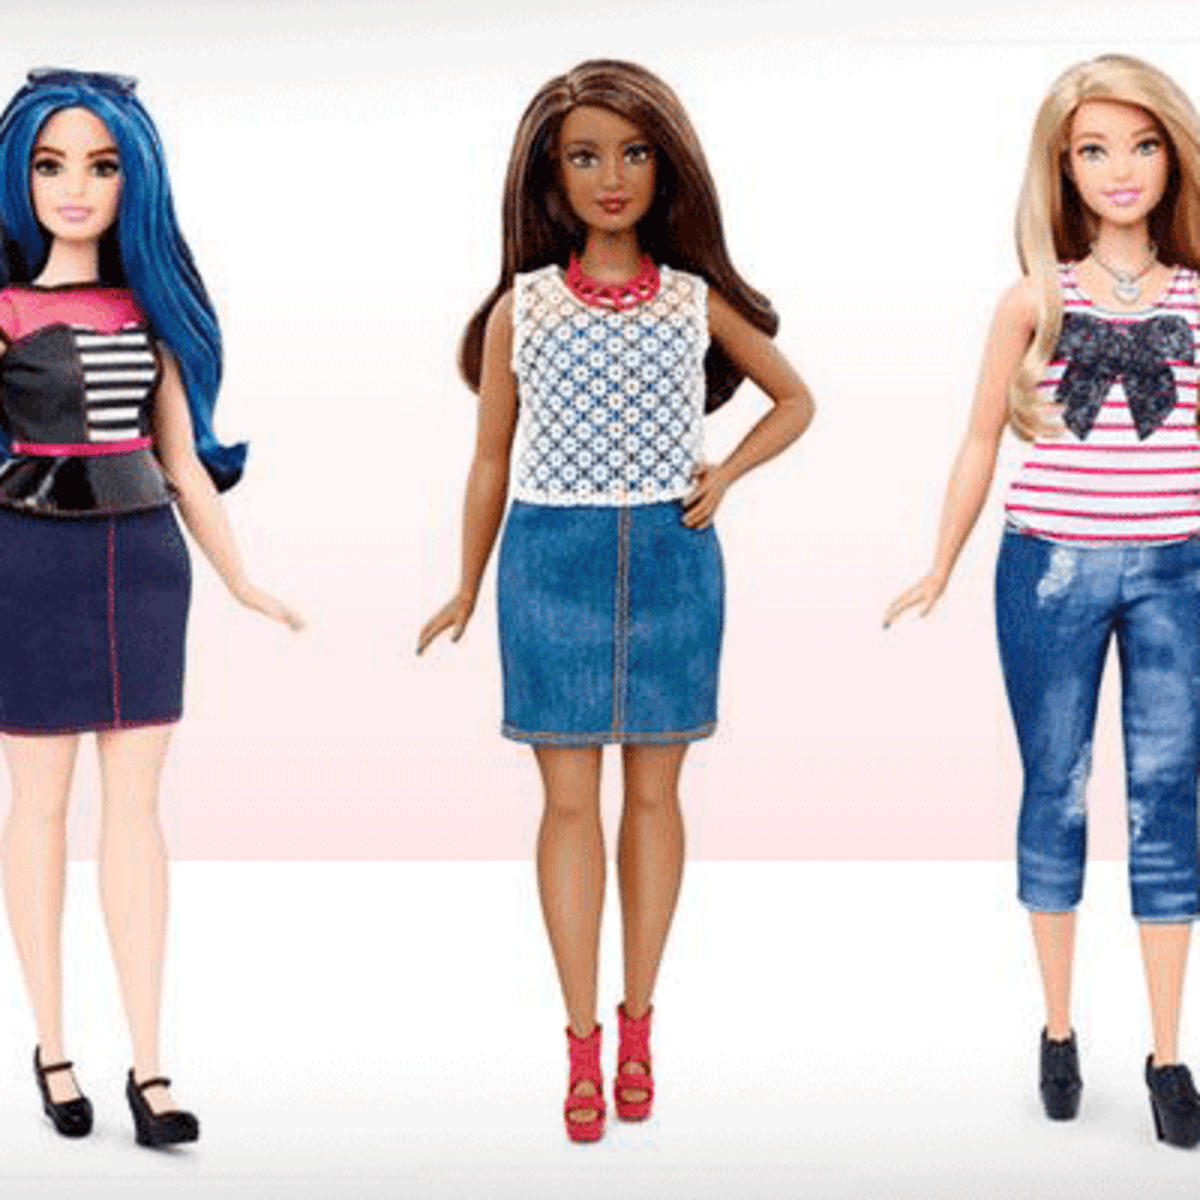 Mattel's Plus Barbie Steps Out, Sales Gains Expected TheStreet